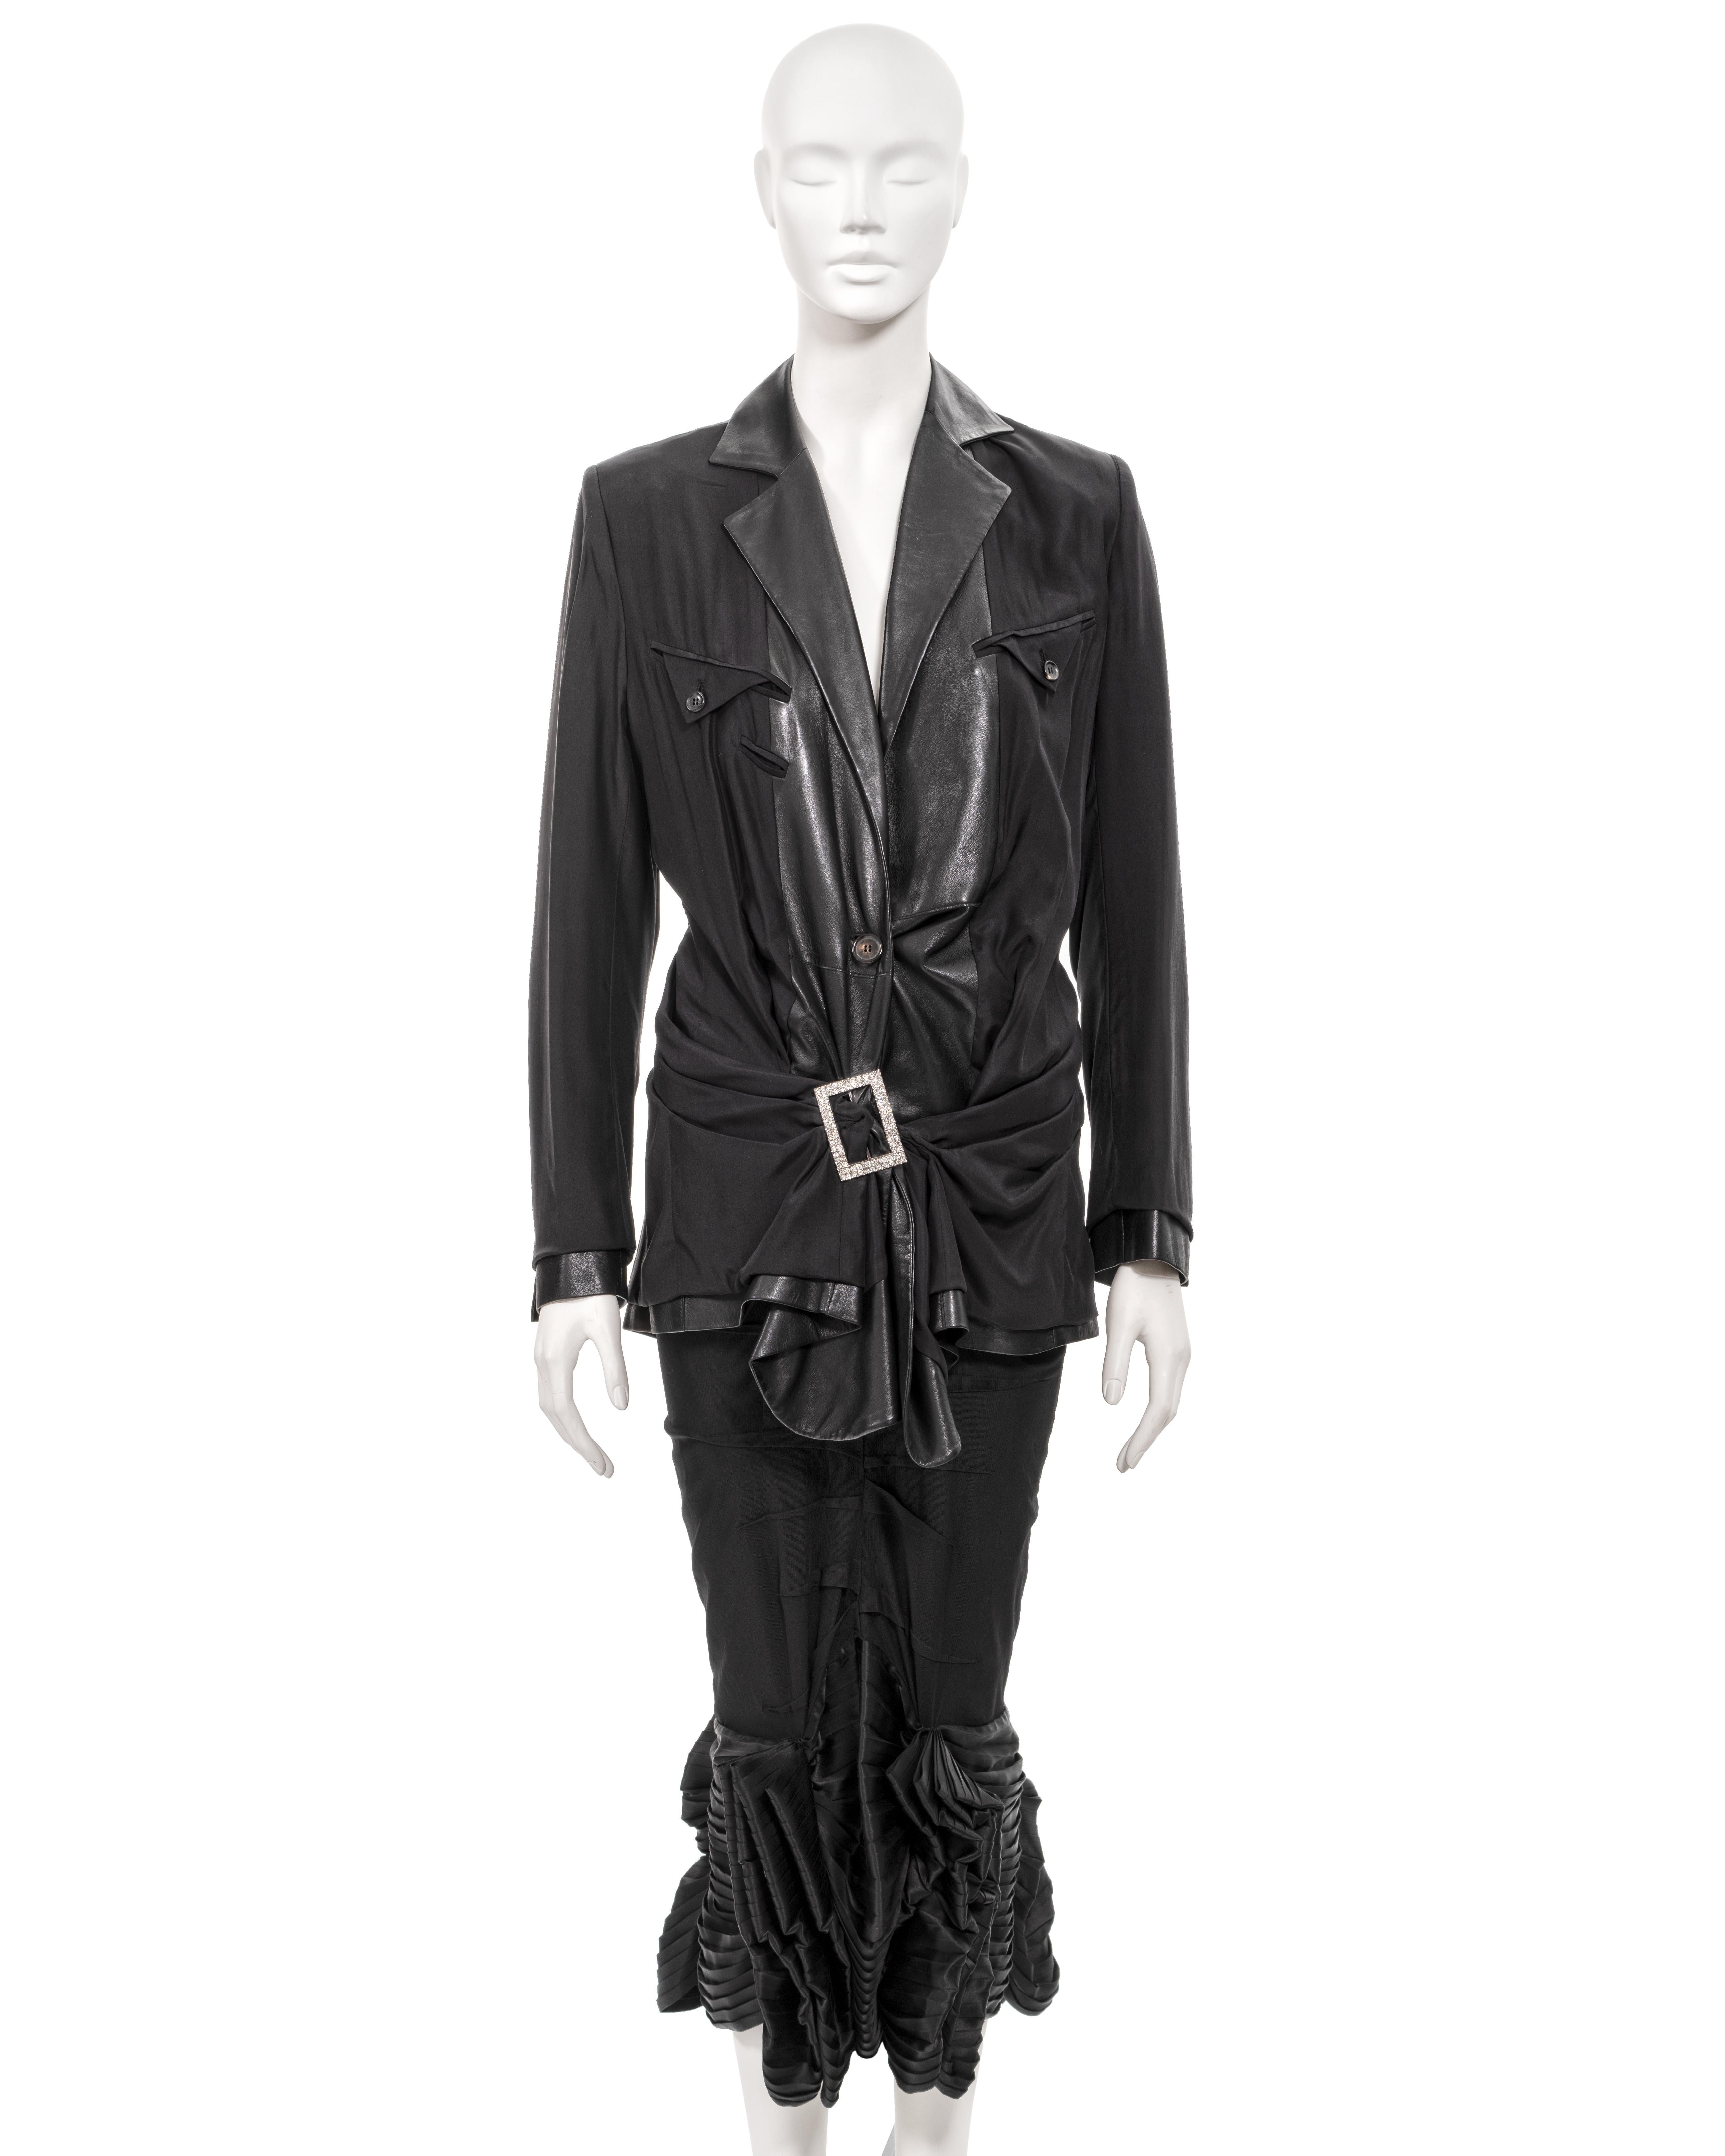 Christian Dior by John Galliano inside-out leather jacket and skirt set, ss 2003 For Sale 1